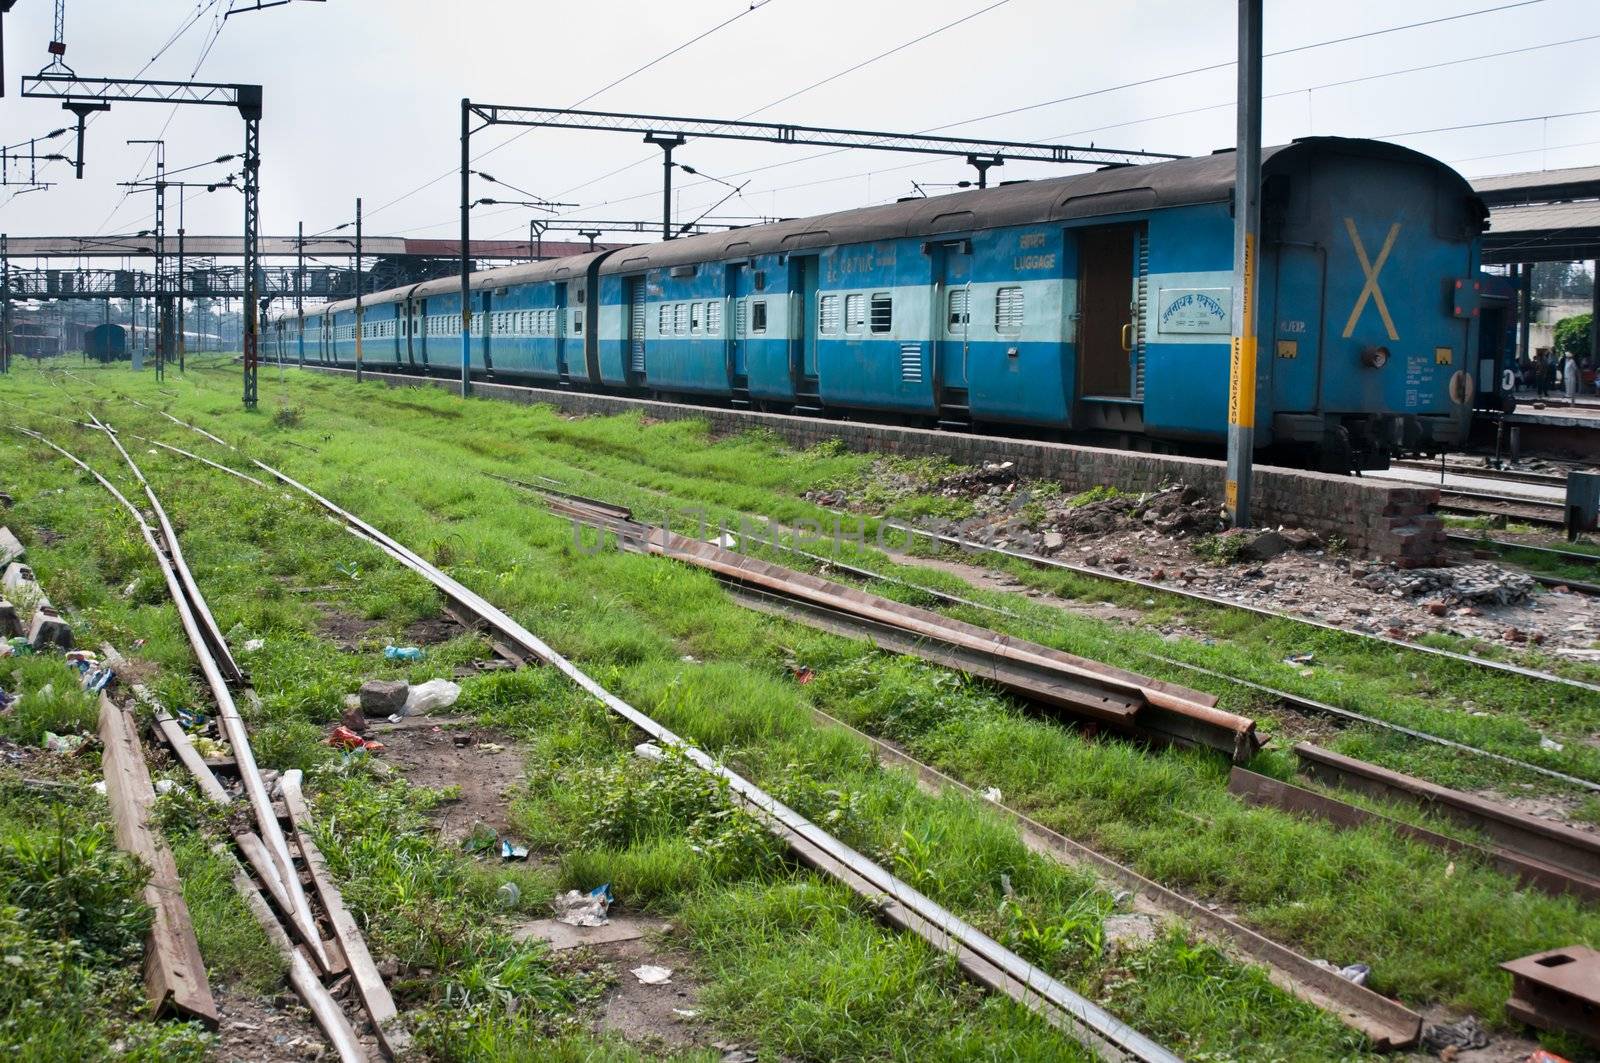 Amritsar, India - August 26, 2011: Train of the great Indian railway transport system without passengers on the station